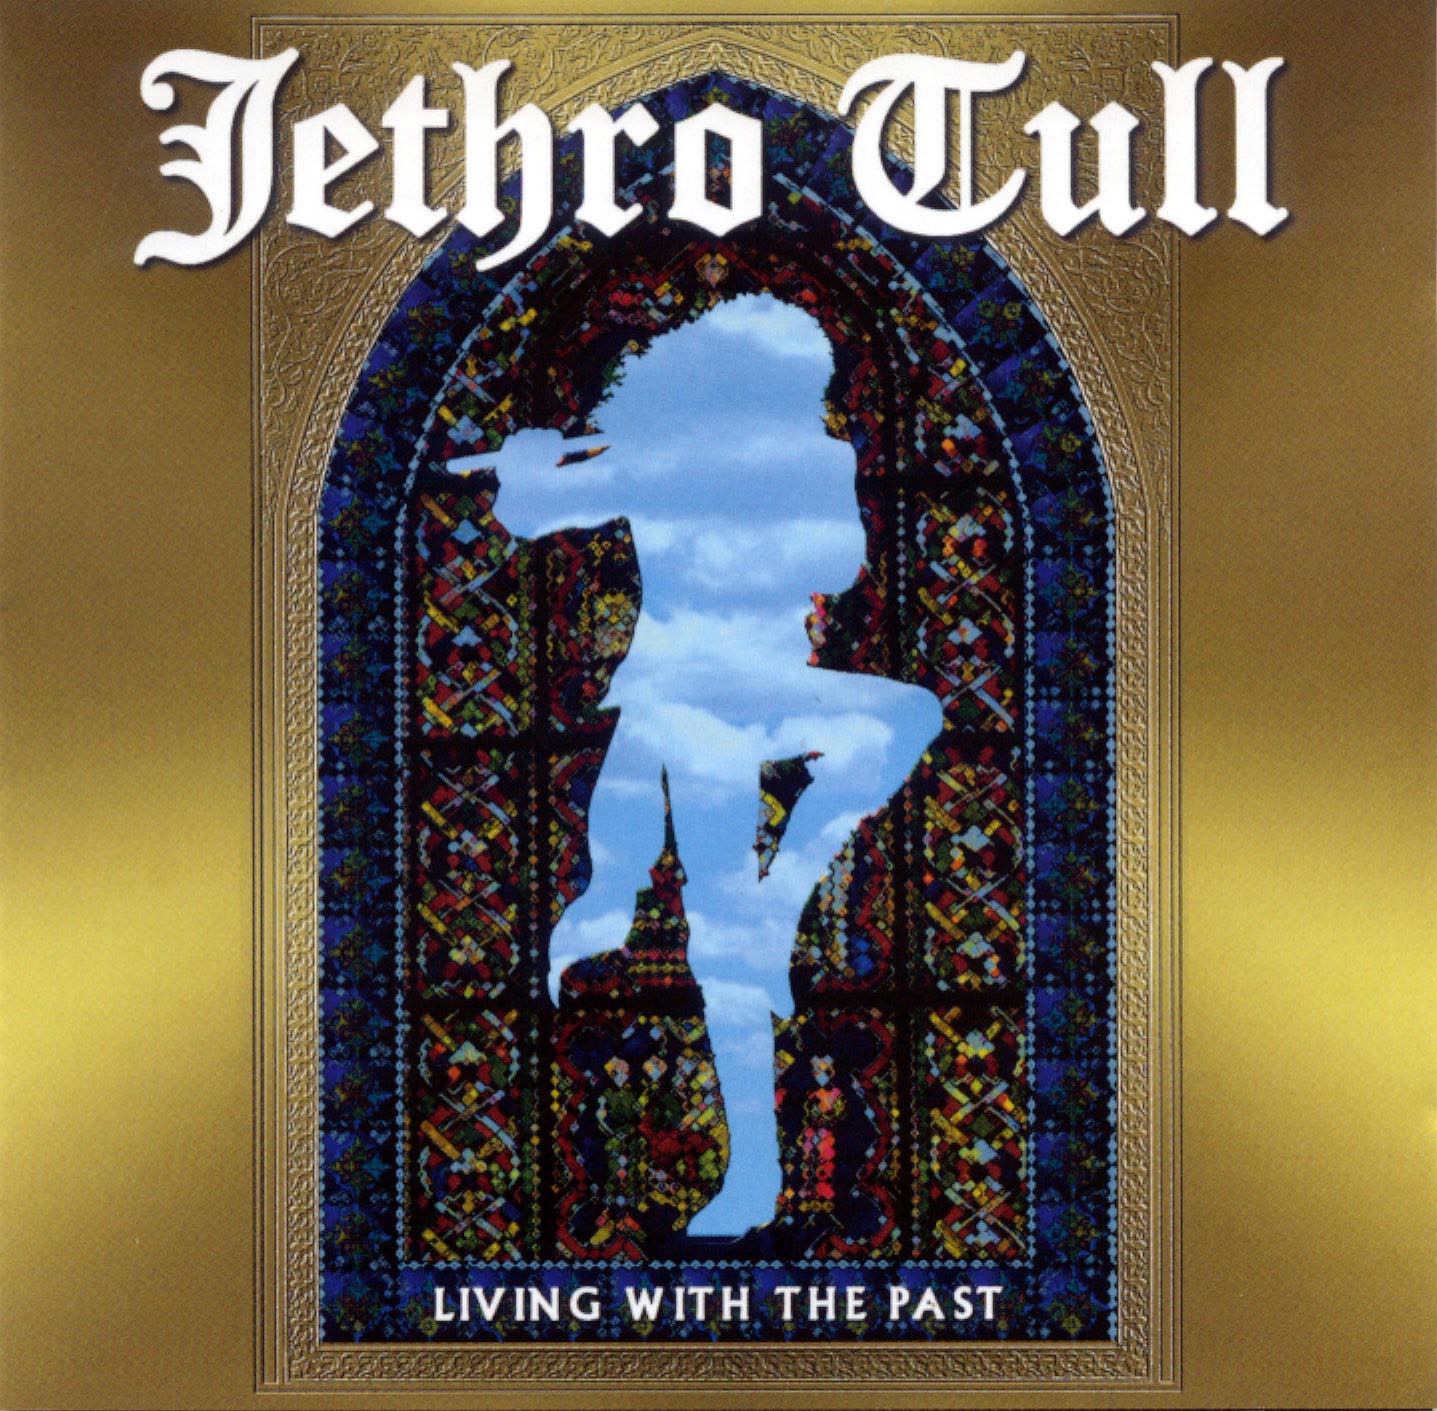 Cartula Frontal de Jethro Tull - Living With The Past